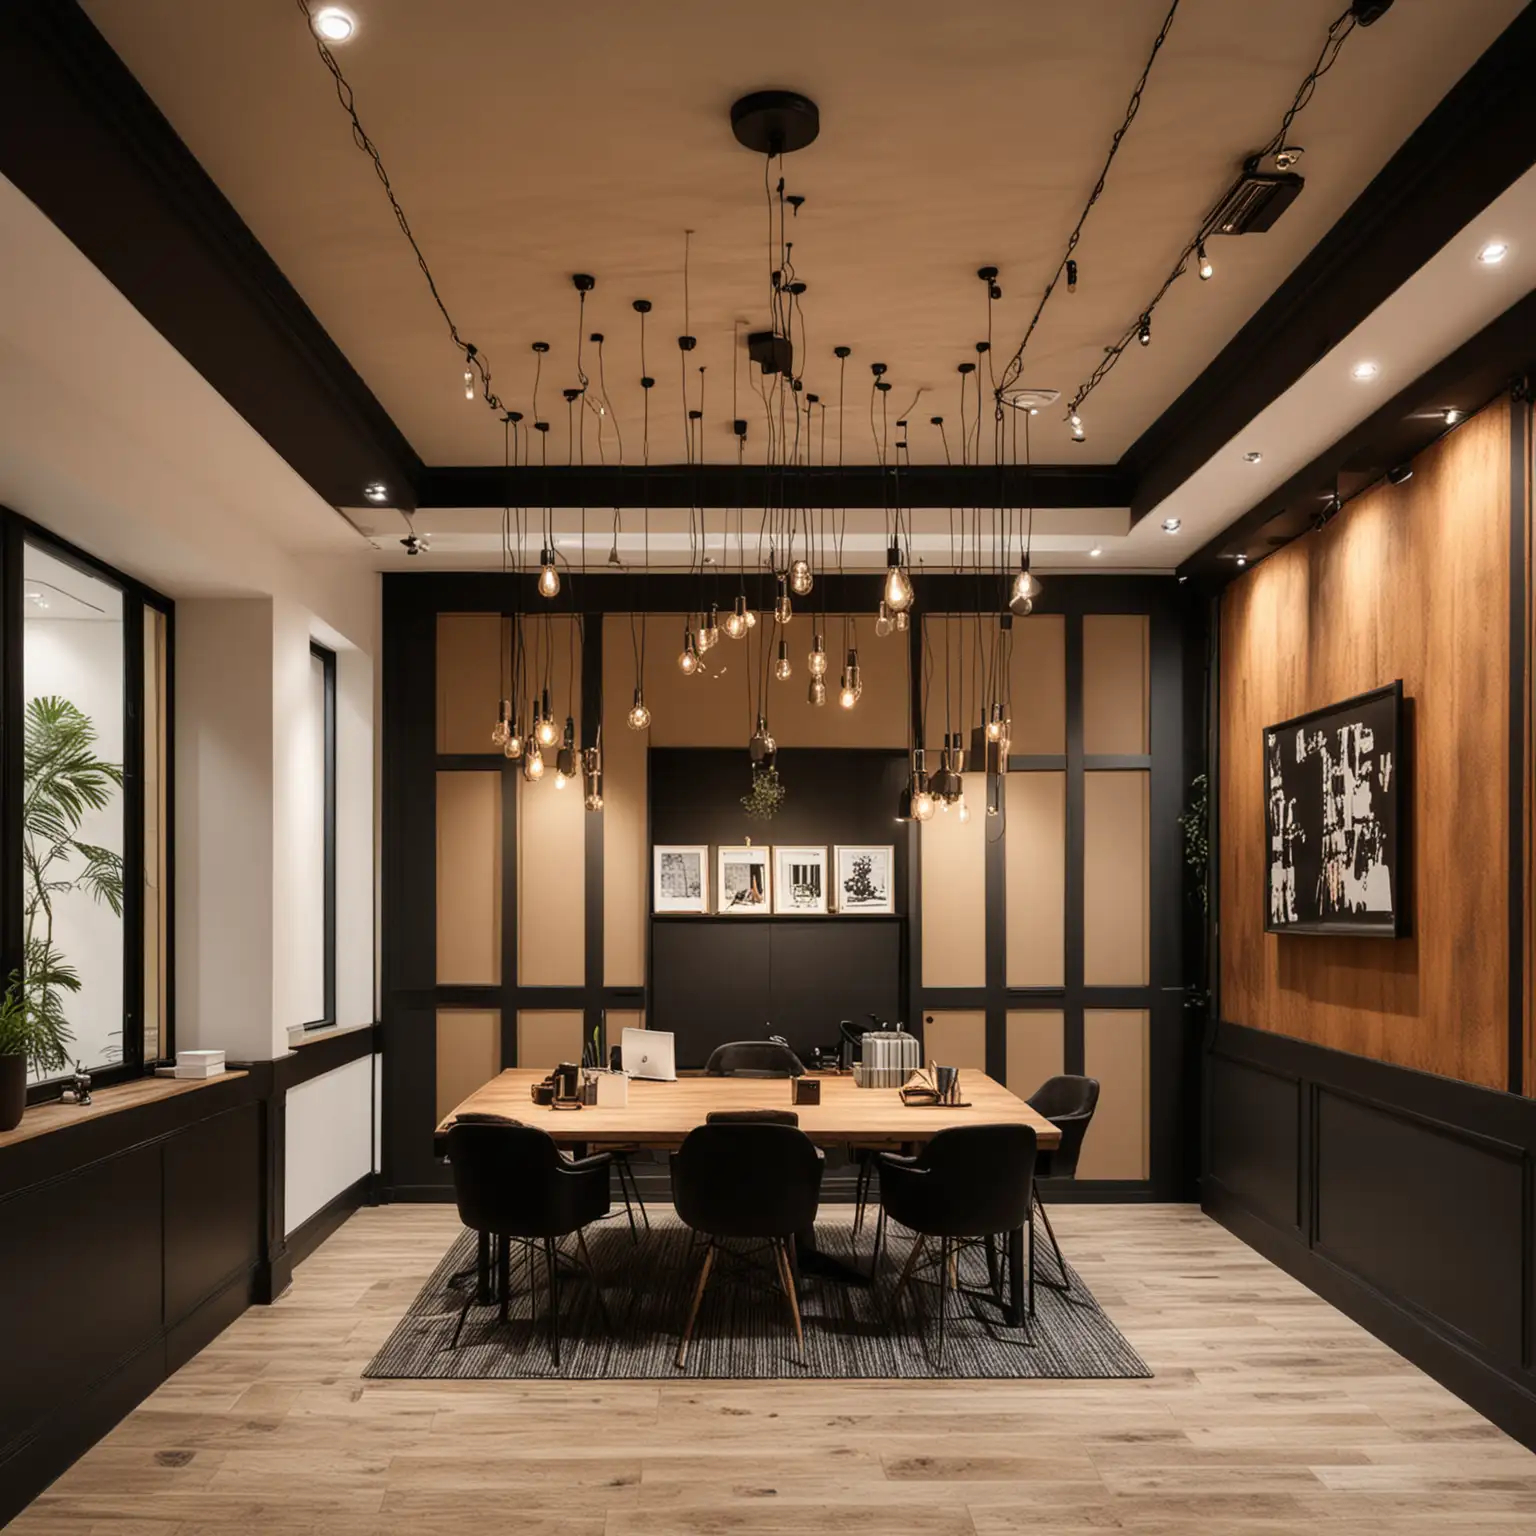 Interior designed commercial offices design in a traditional contemporary style with a modern twist. Make the space feel warm and inviting with a mixed colour pallets of browns and black warm colours and patterns and pendant lighting